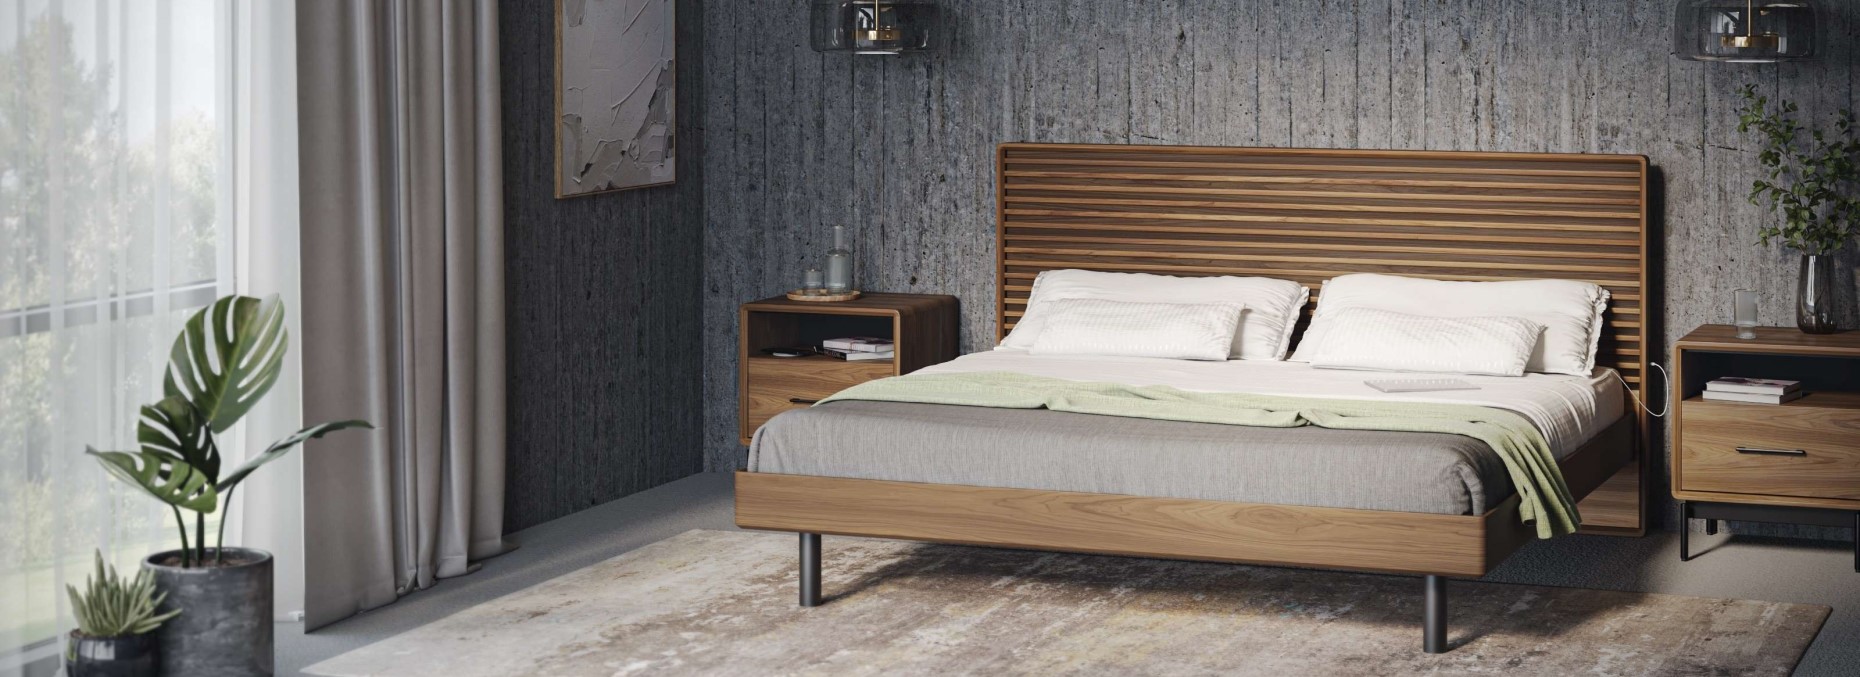 Cross Linq king bed